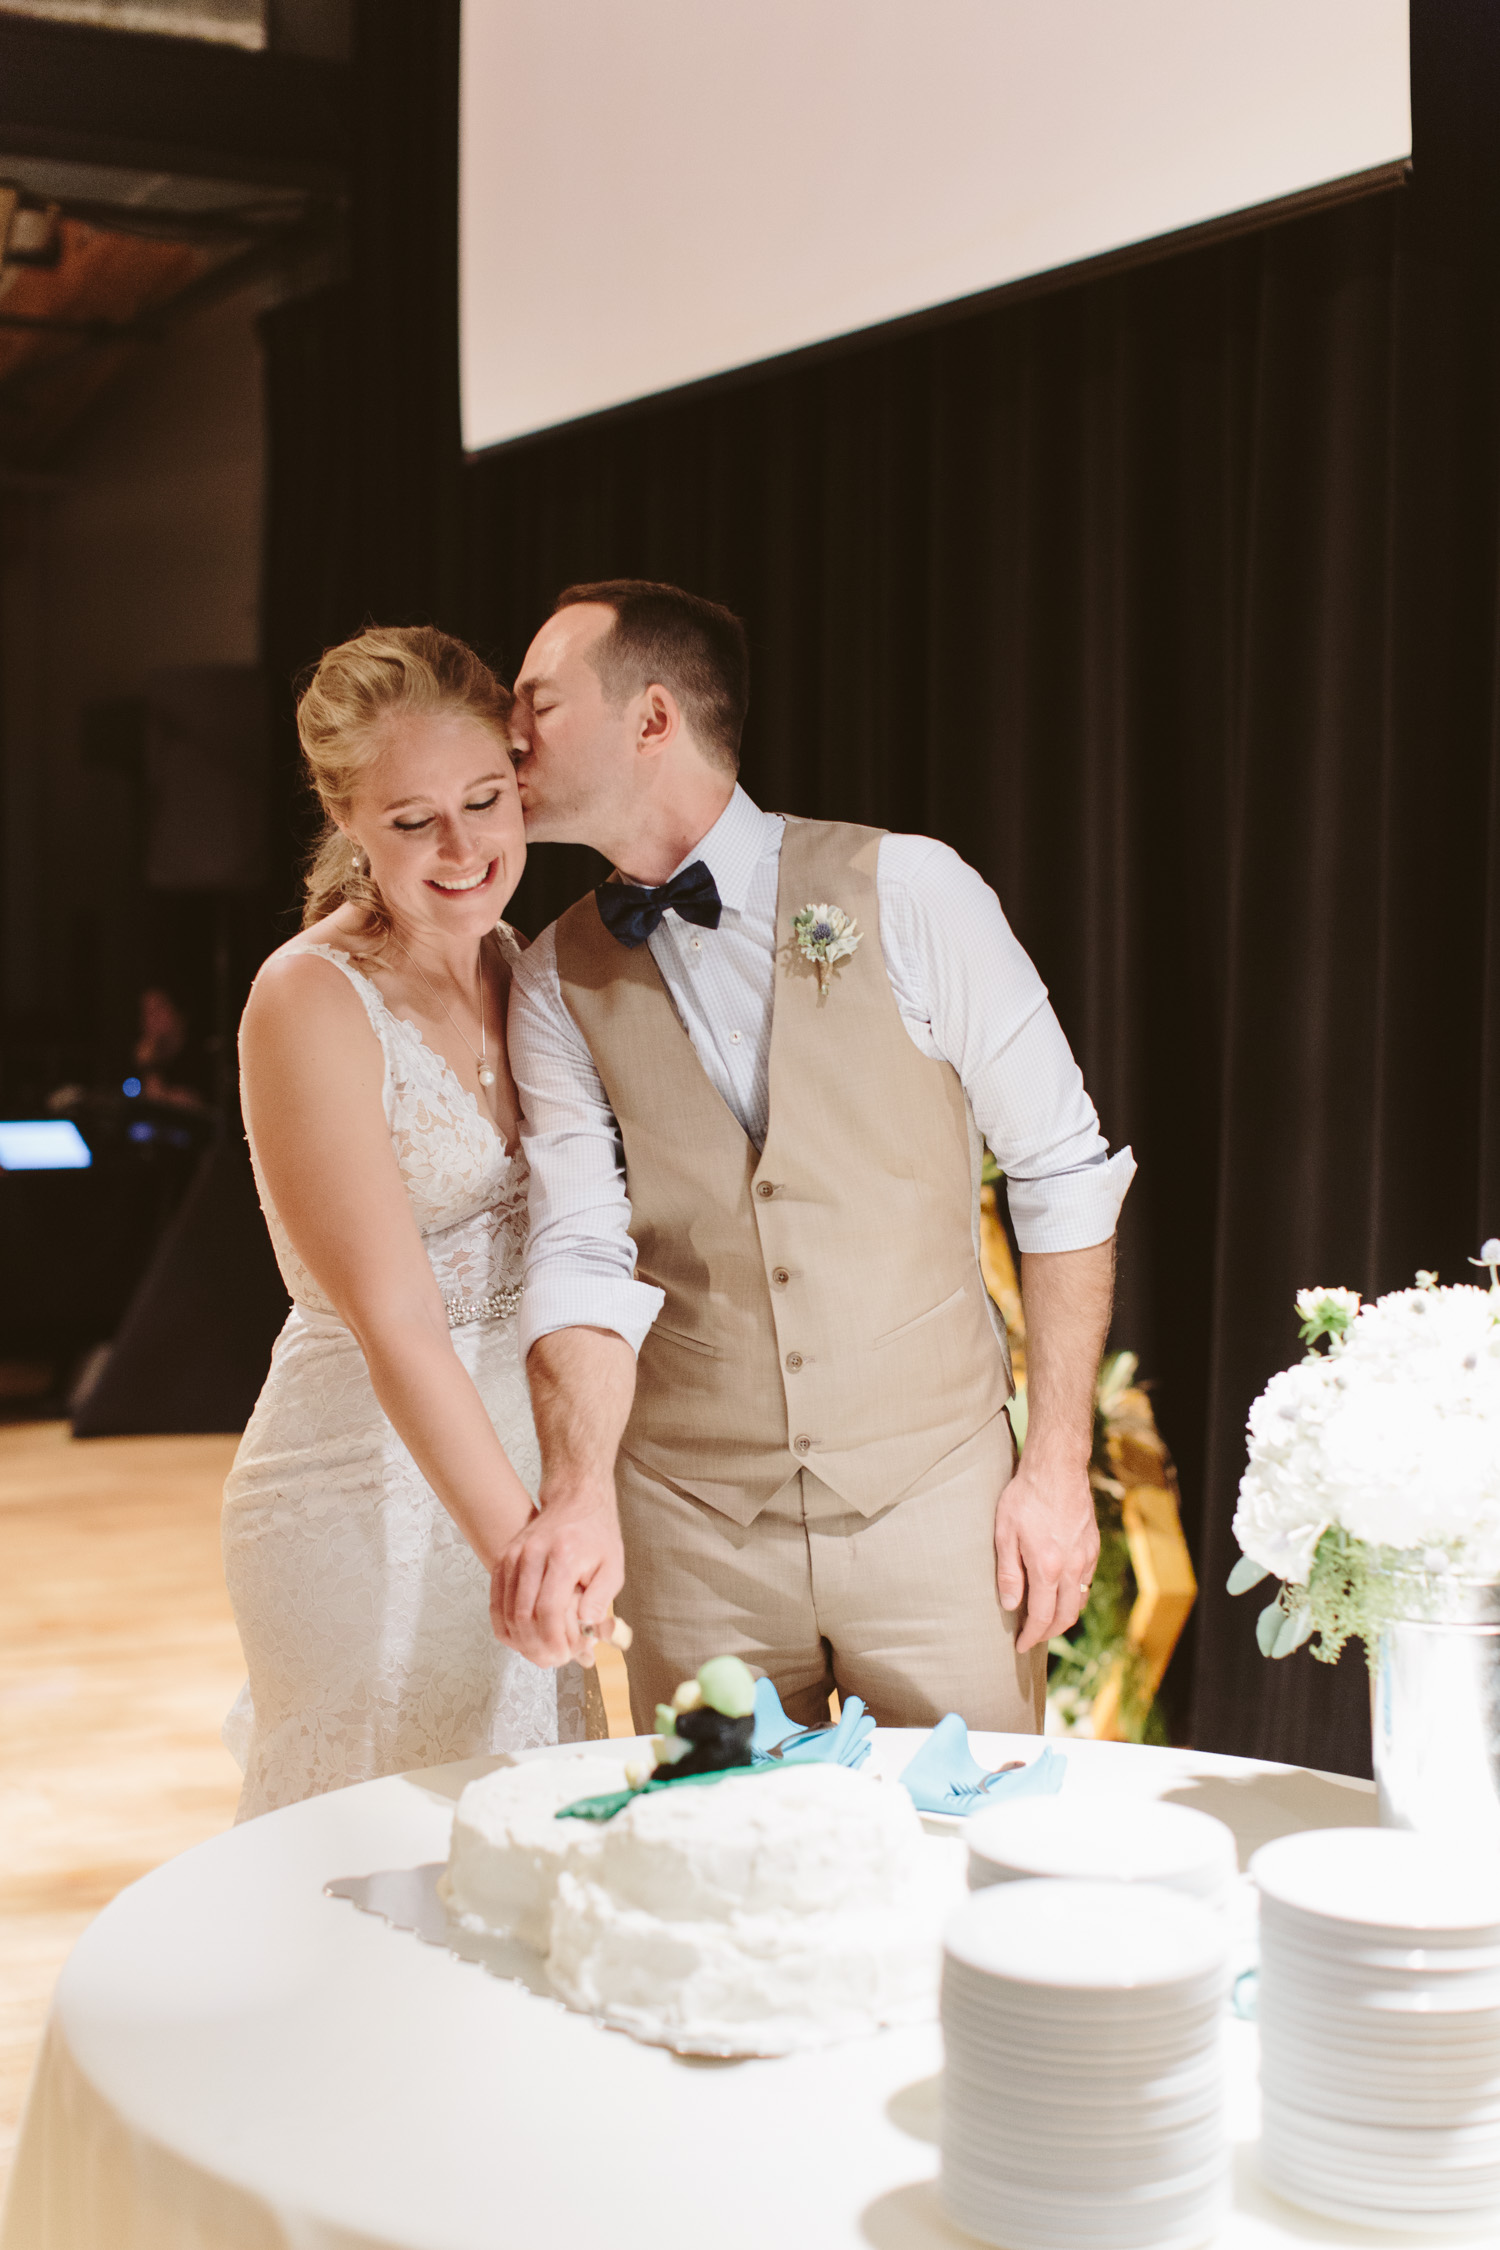 Steph & Jacob | Wedding Photos - Cake Cutting | Wedding & Event Planners | Dreamgroup